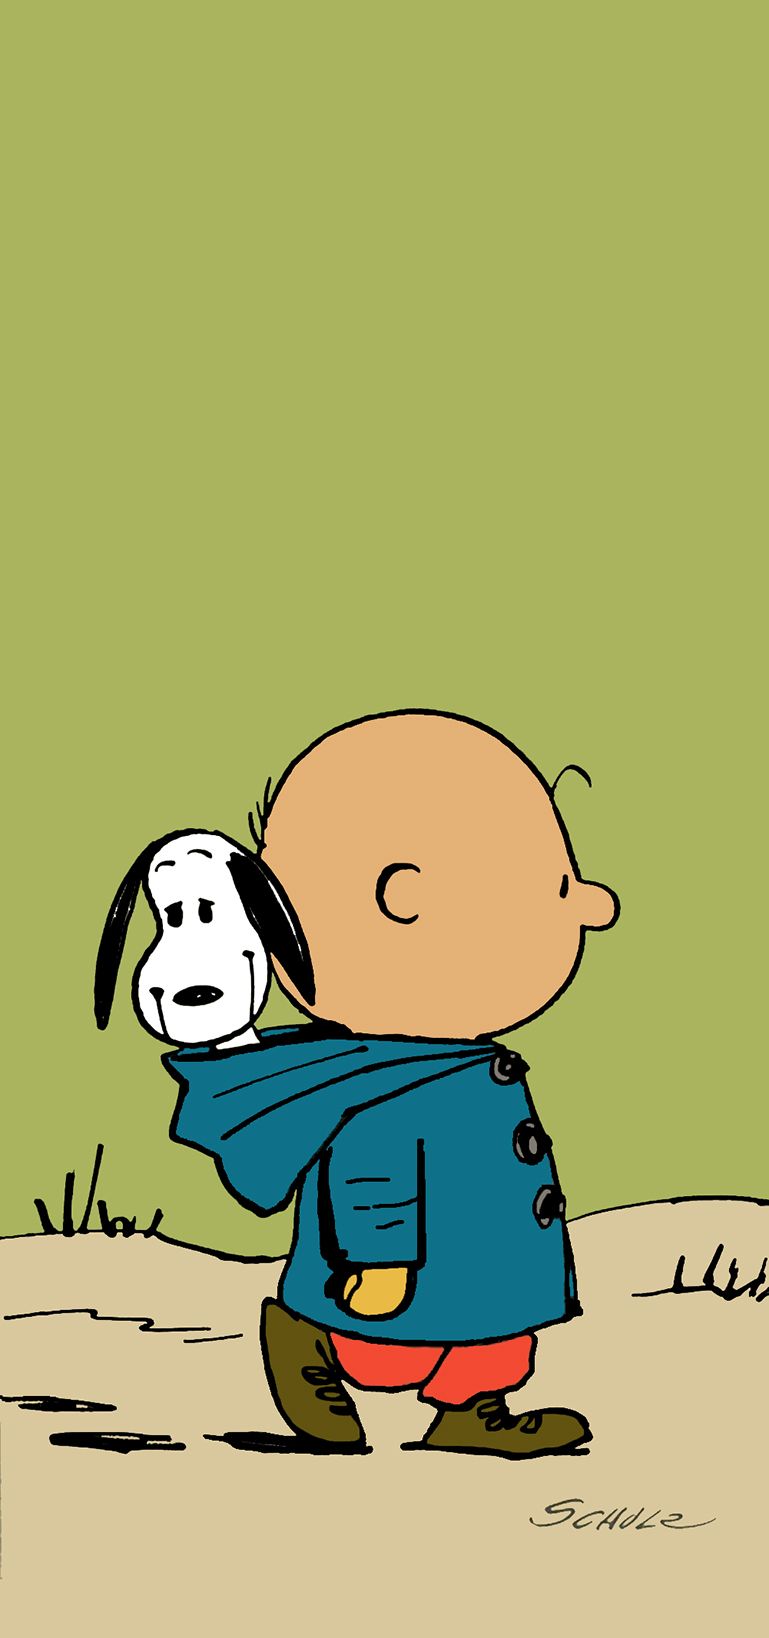 Snoopy And Charlie Brown Iphone - HD Wallpaper 